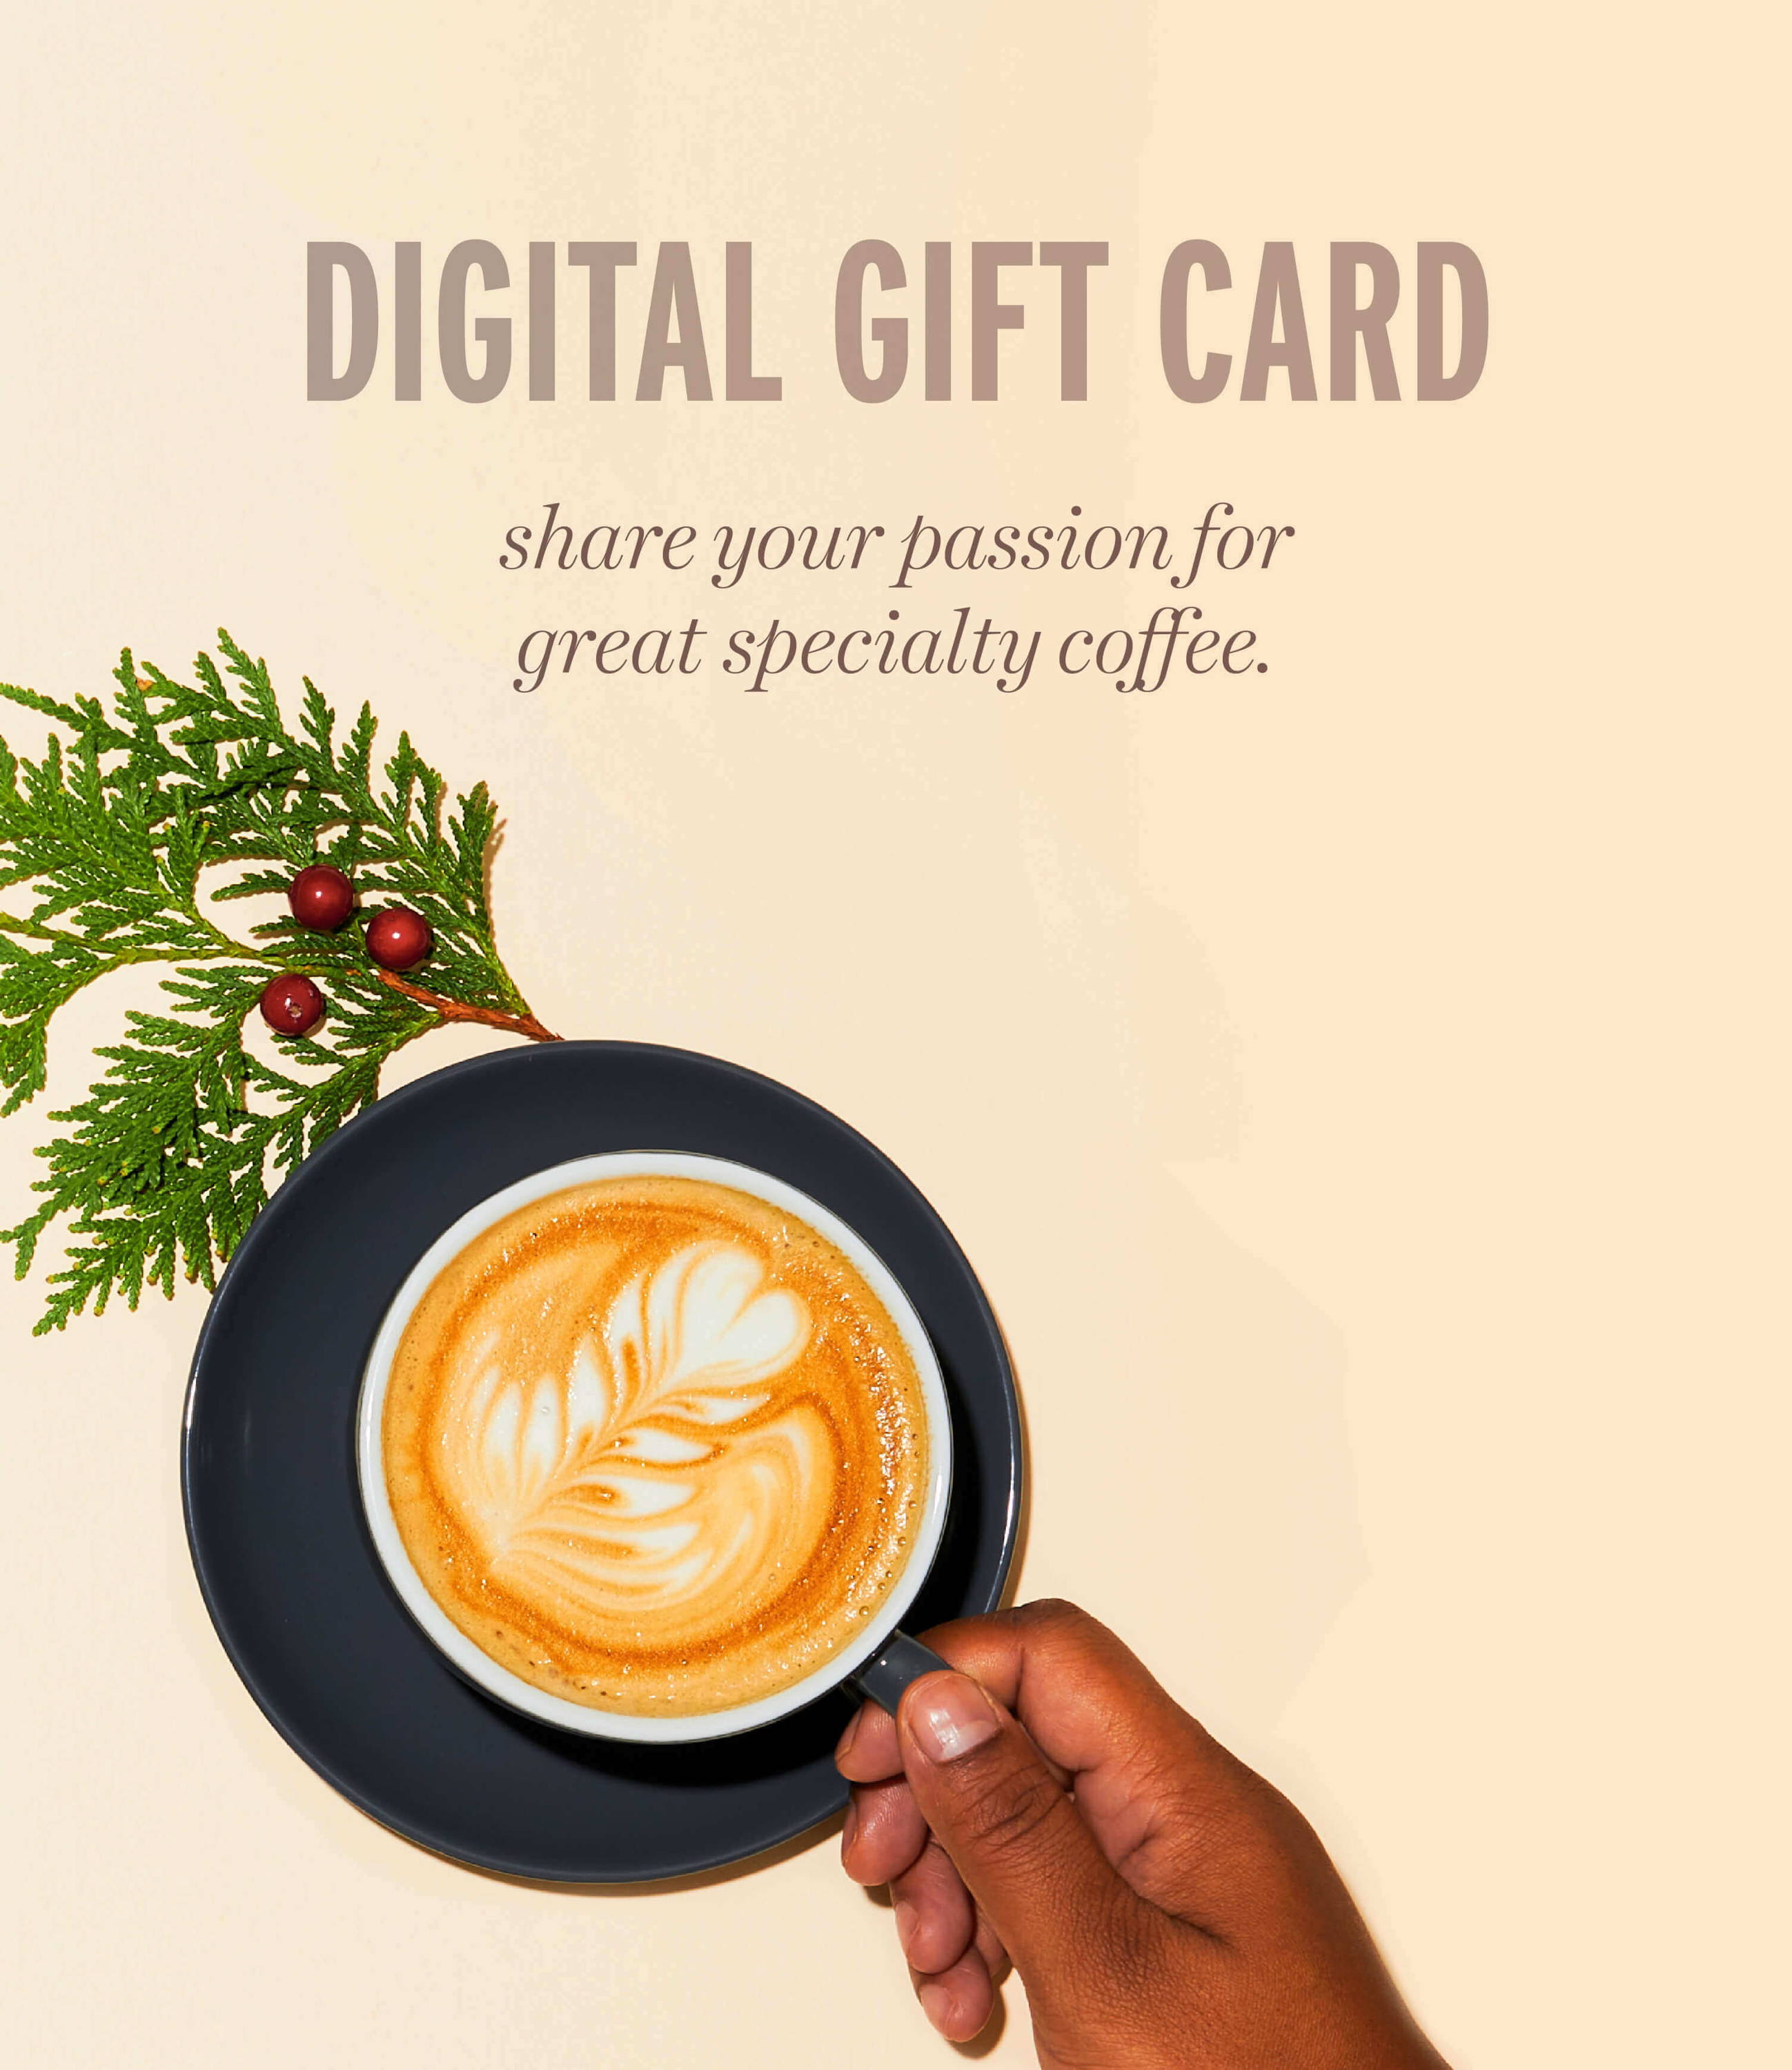 Digital Gift Card - share your passion for great specialty coffee